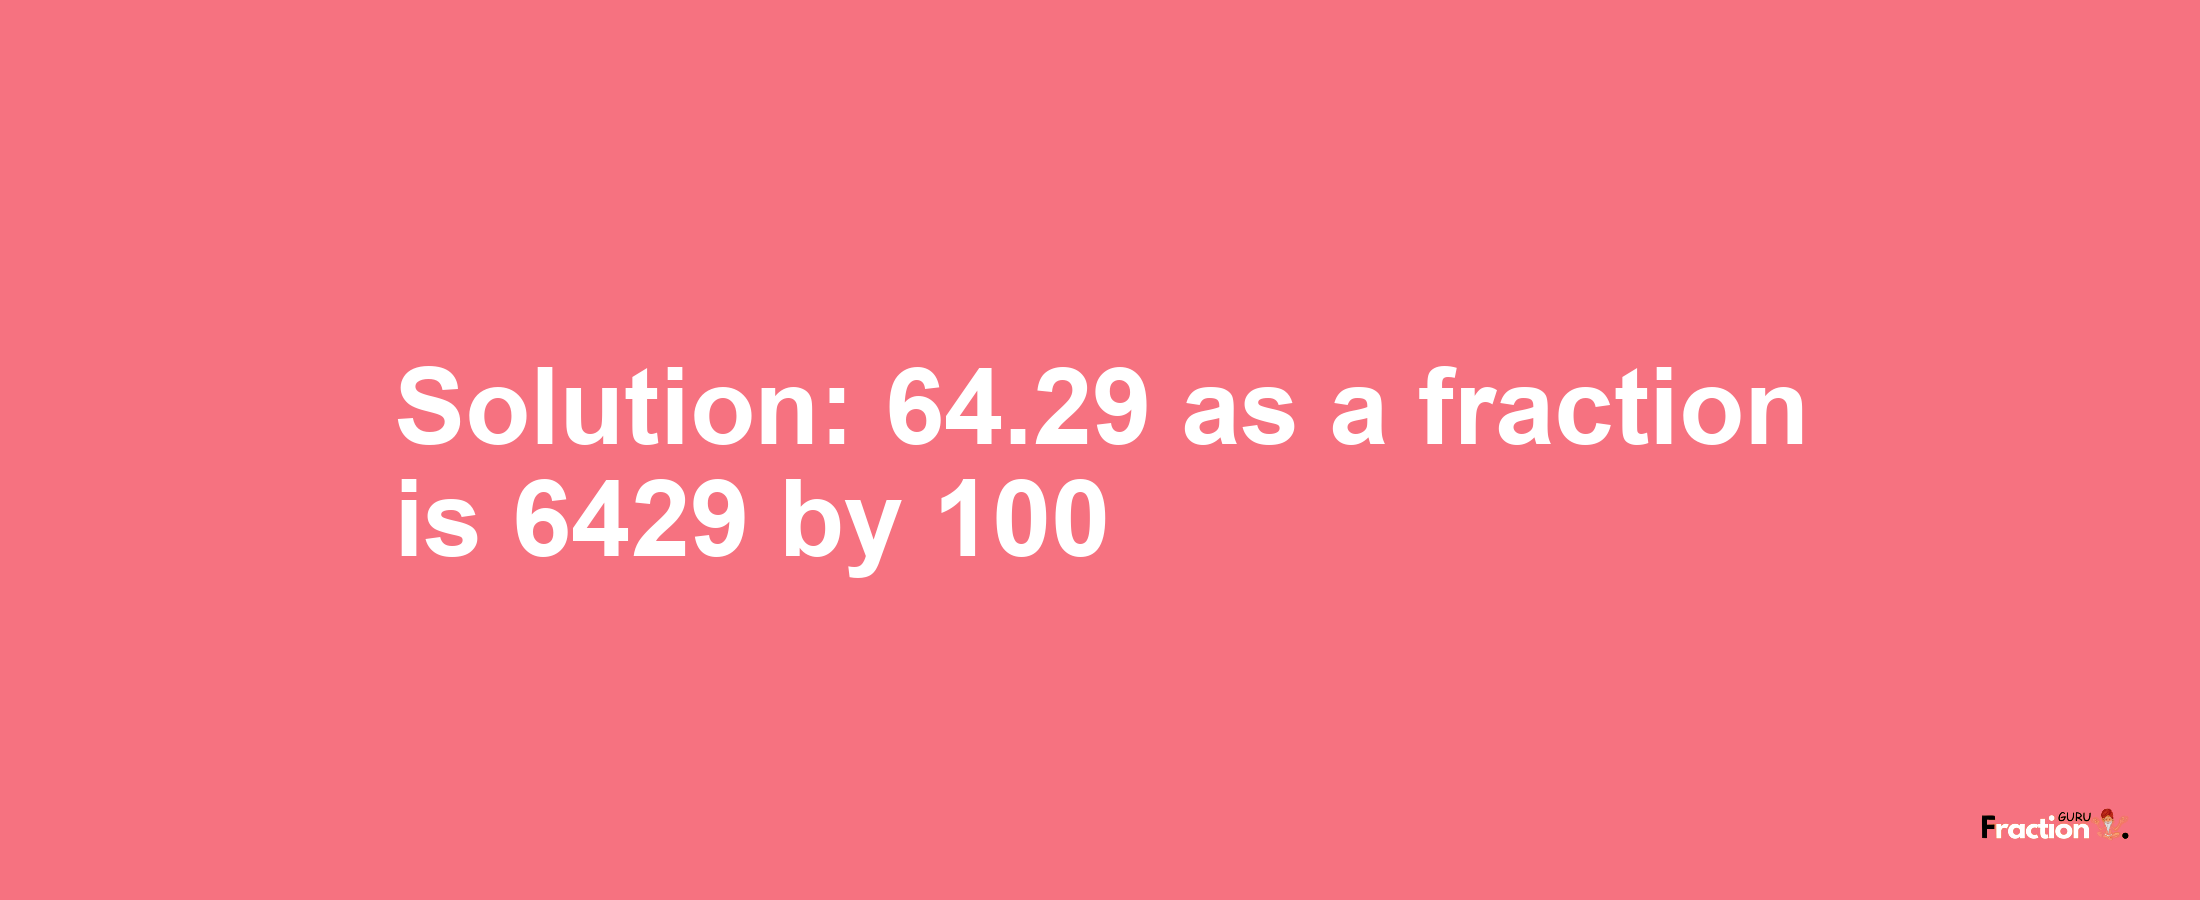 Solution:64.29 as a fraction is 6429/100